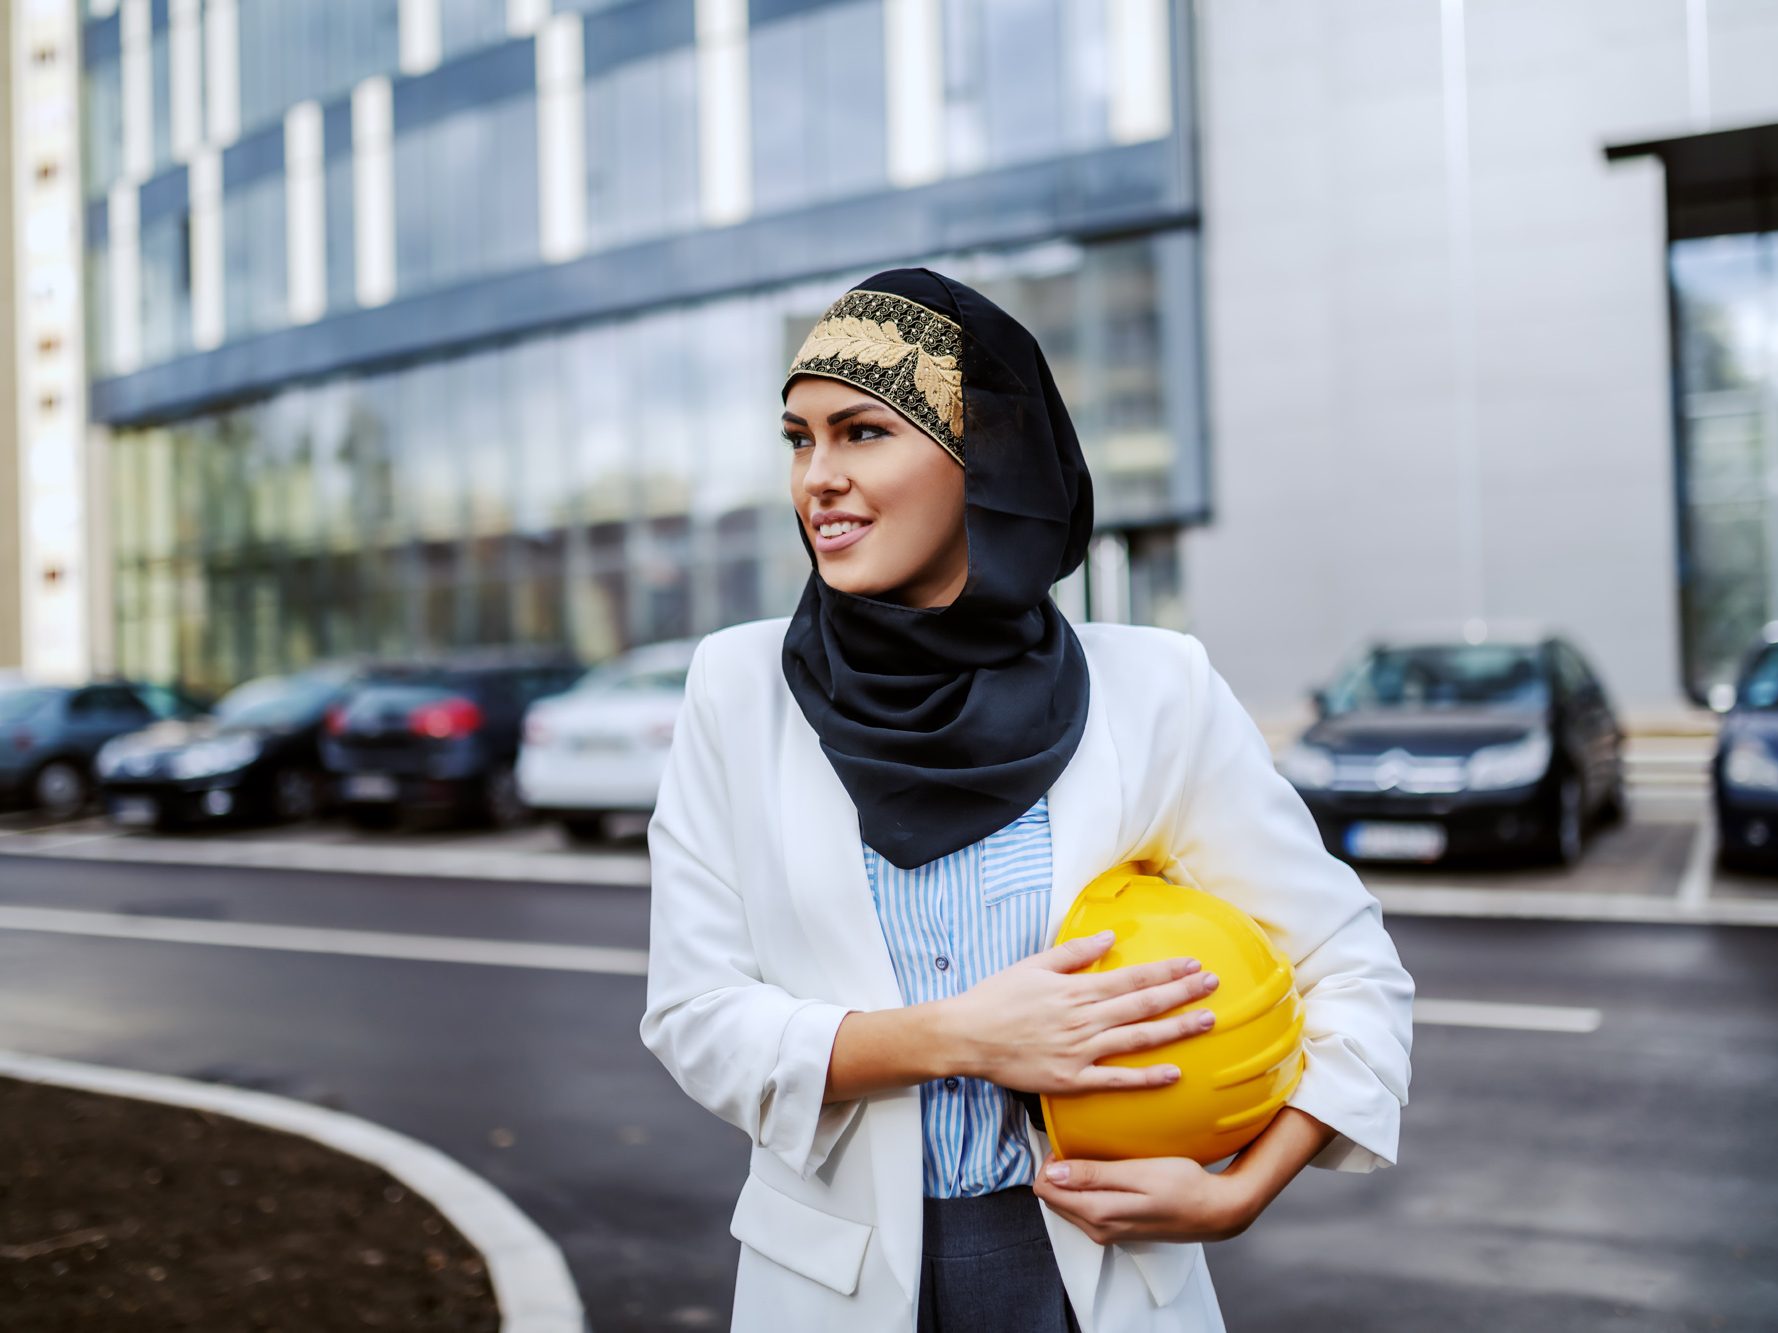 Arabic Young Woman With Hardhat Being Carried Aspect Ratio 800 600